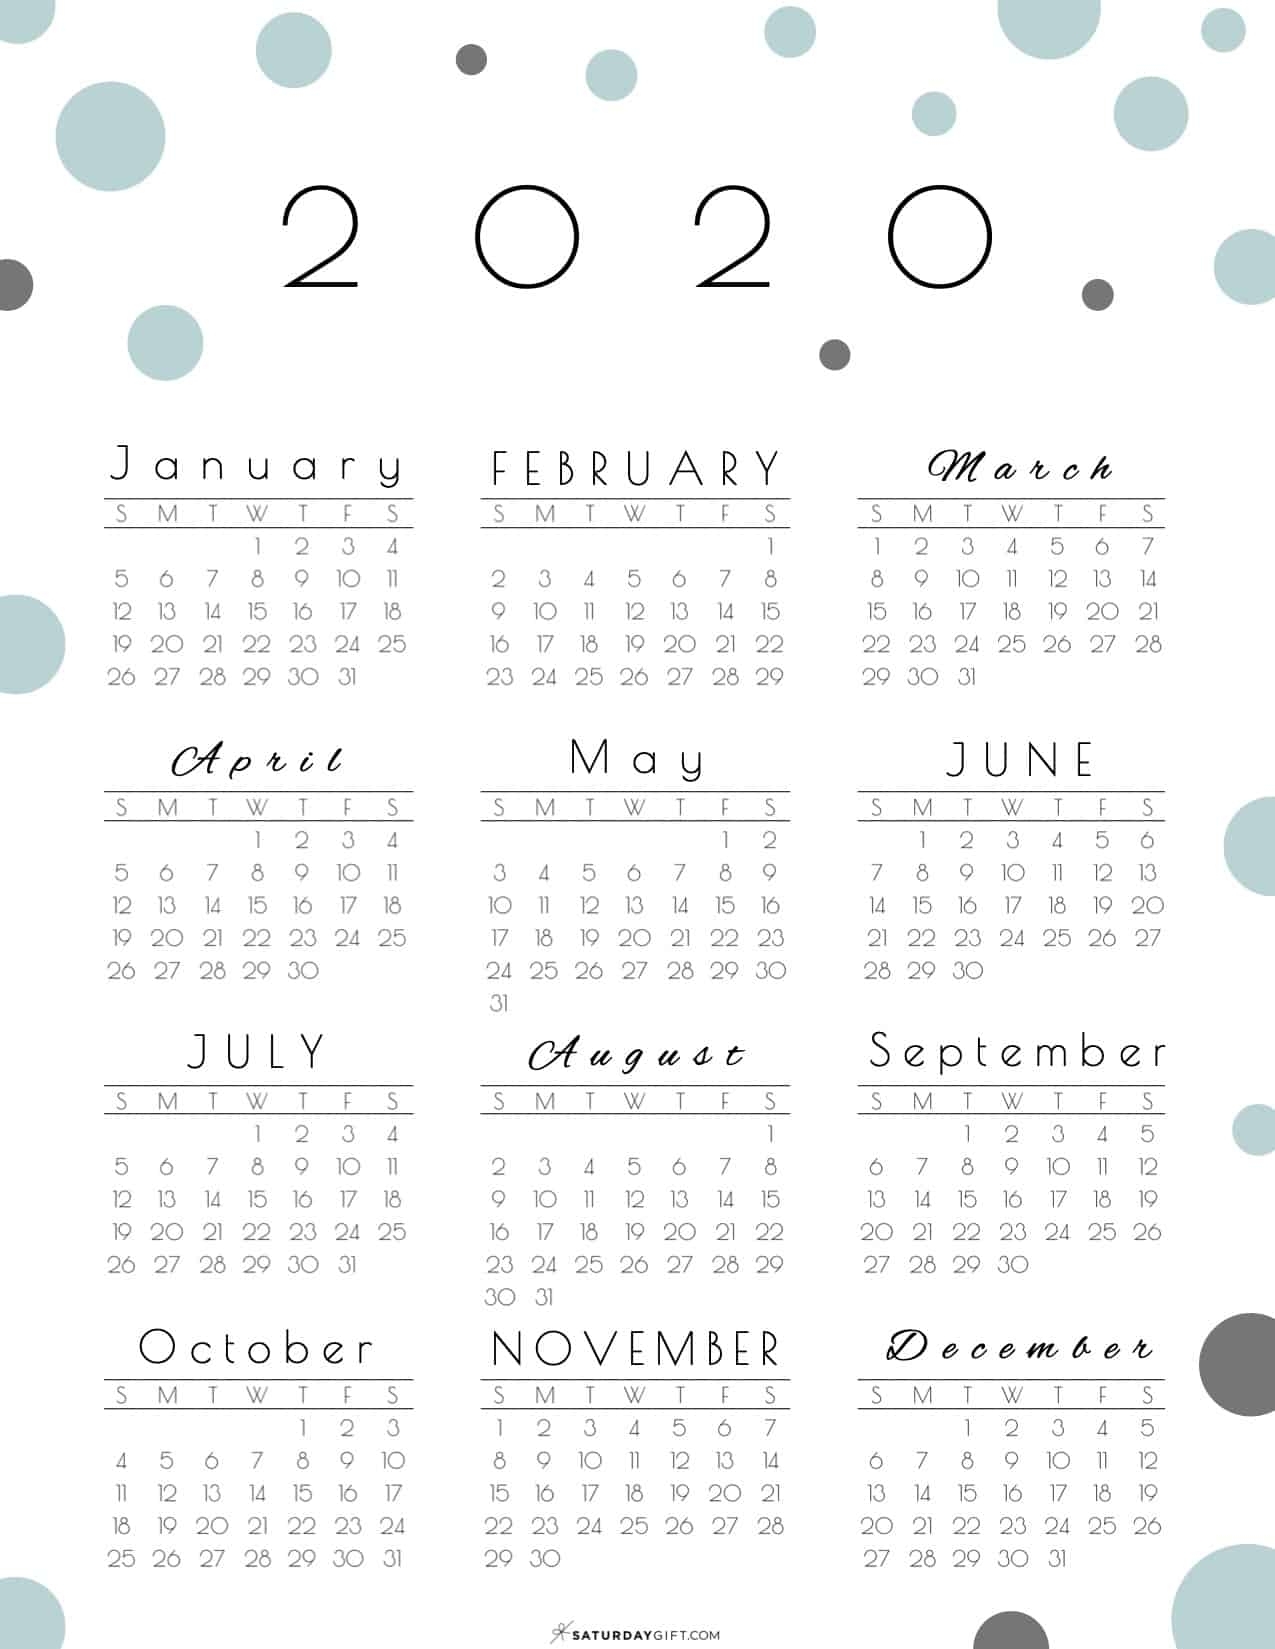 Year At A Glance Calendar 2020 - Pretty (And Free!) Printable with Year At Glance For 2020 To Print